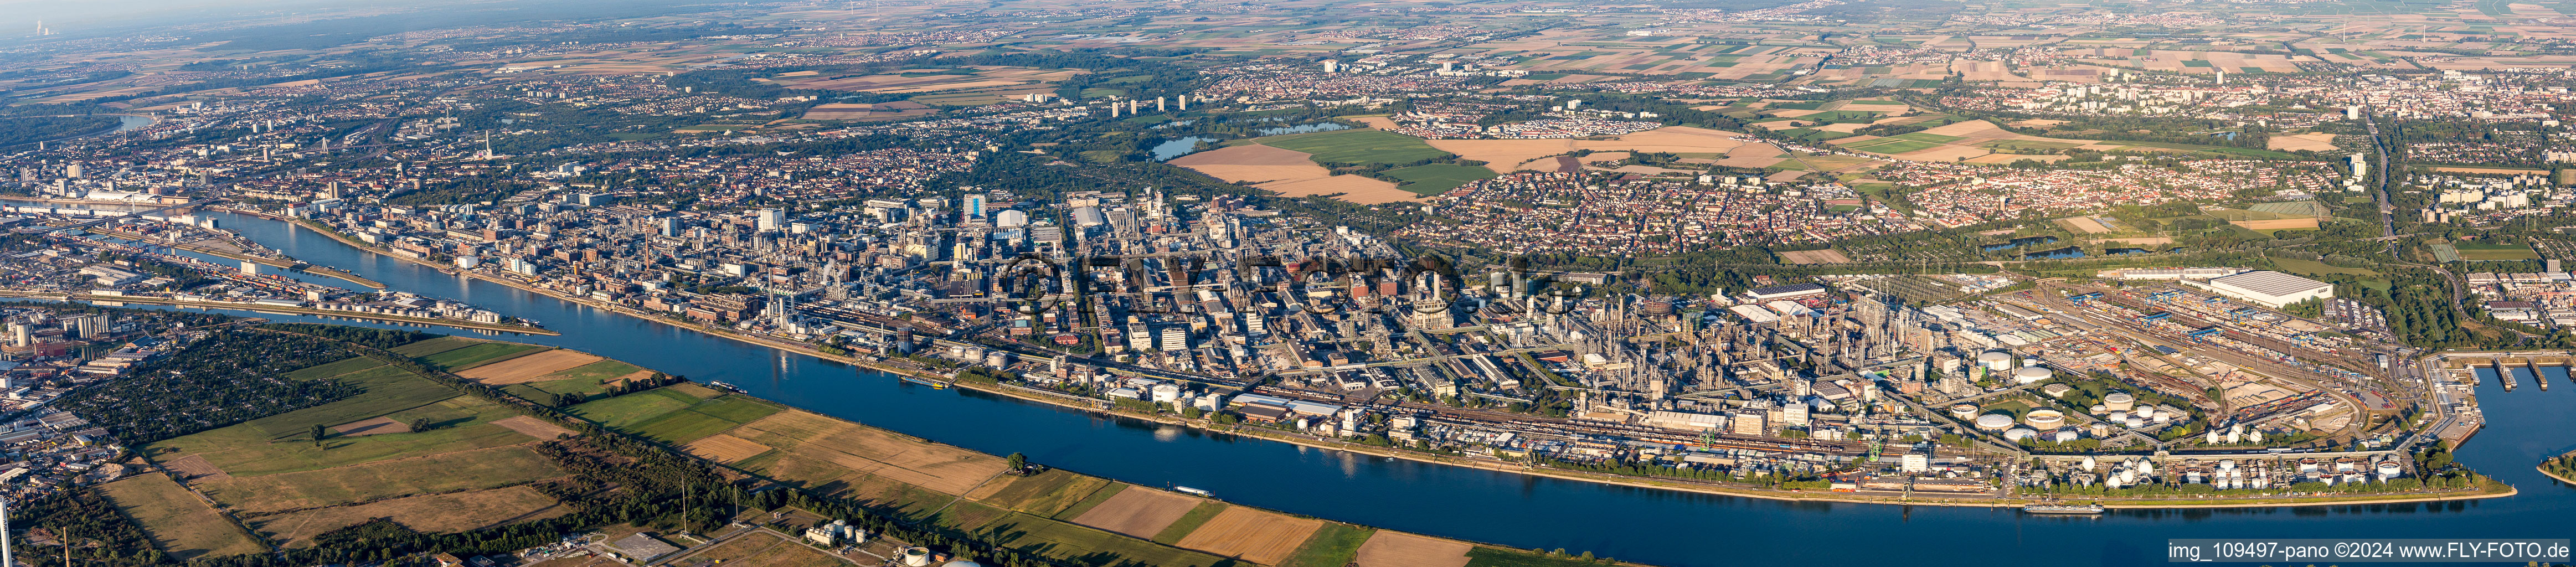 Panorama in the district BASF in Ludwigshafen am Rhein in the state Rhineland-Palatinate, Germany